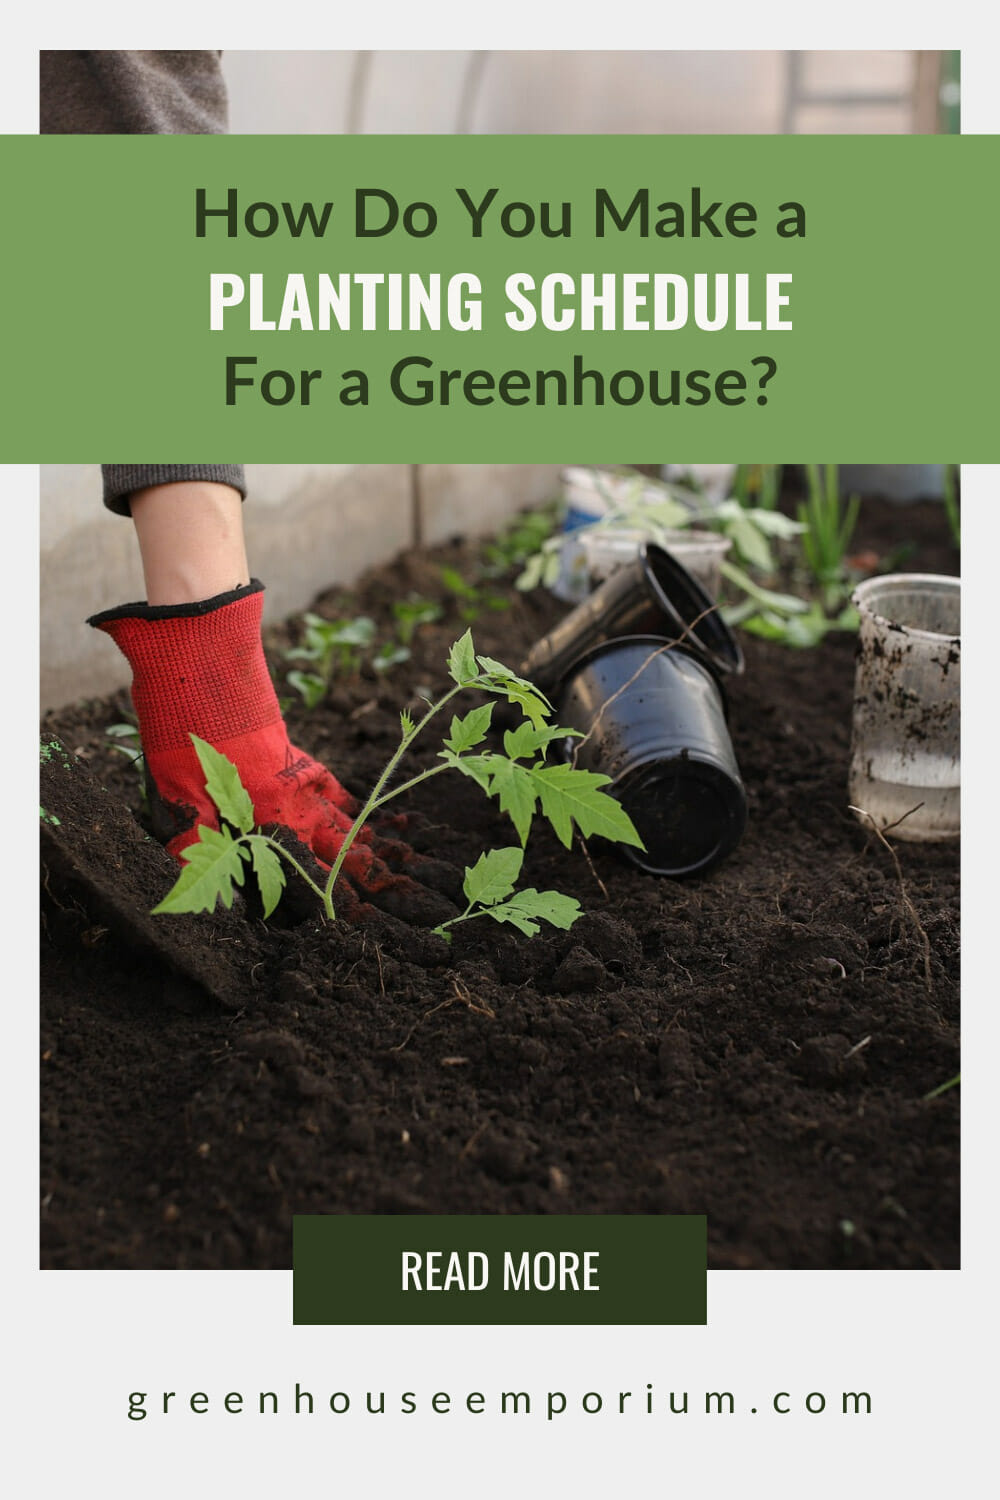 Image of gardener planting in a greenhouse bed with text: How Do You Make a Planting Schedule for a Greenhouse?